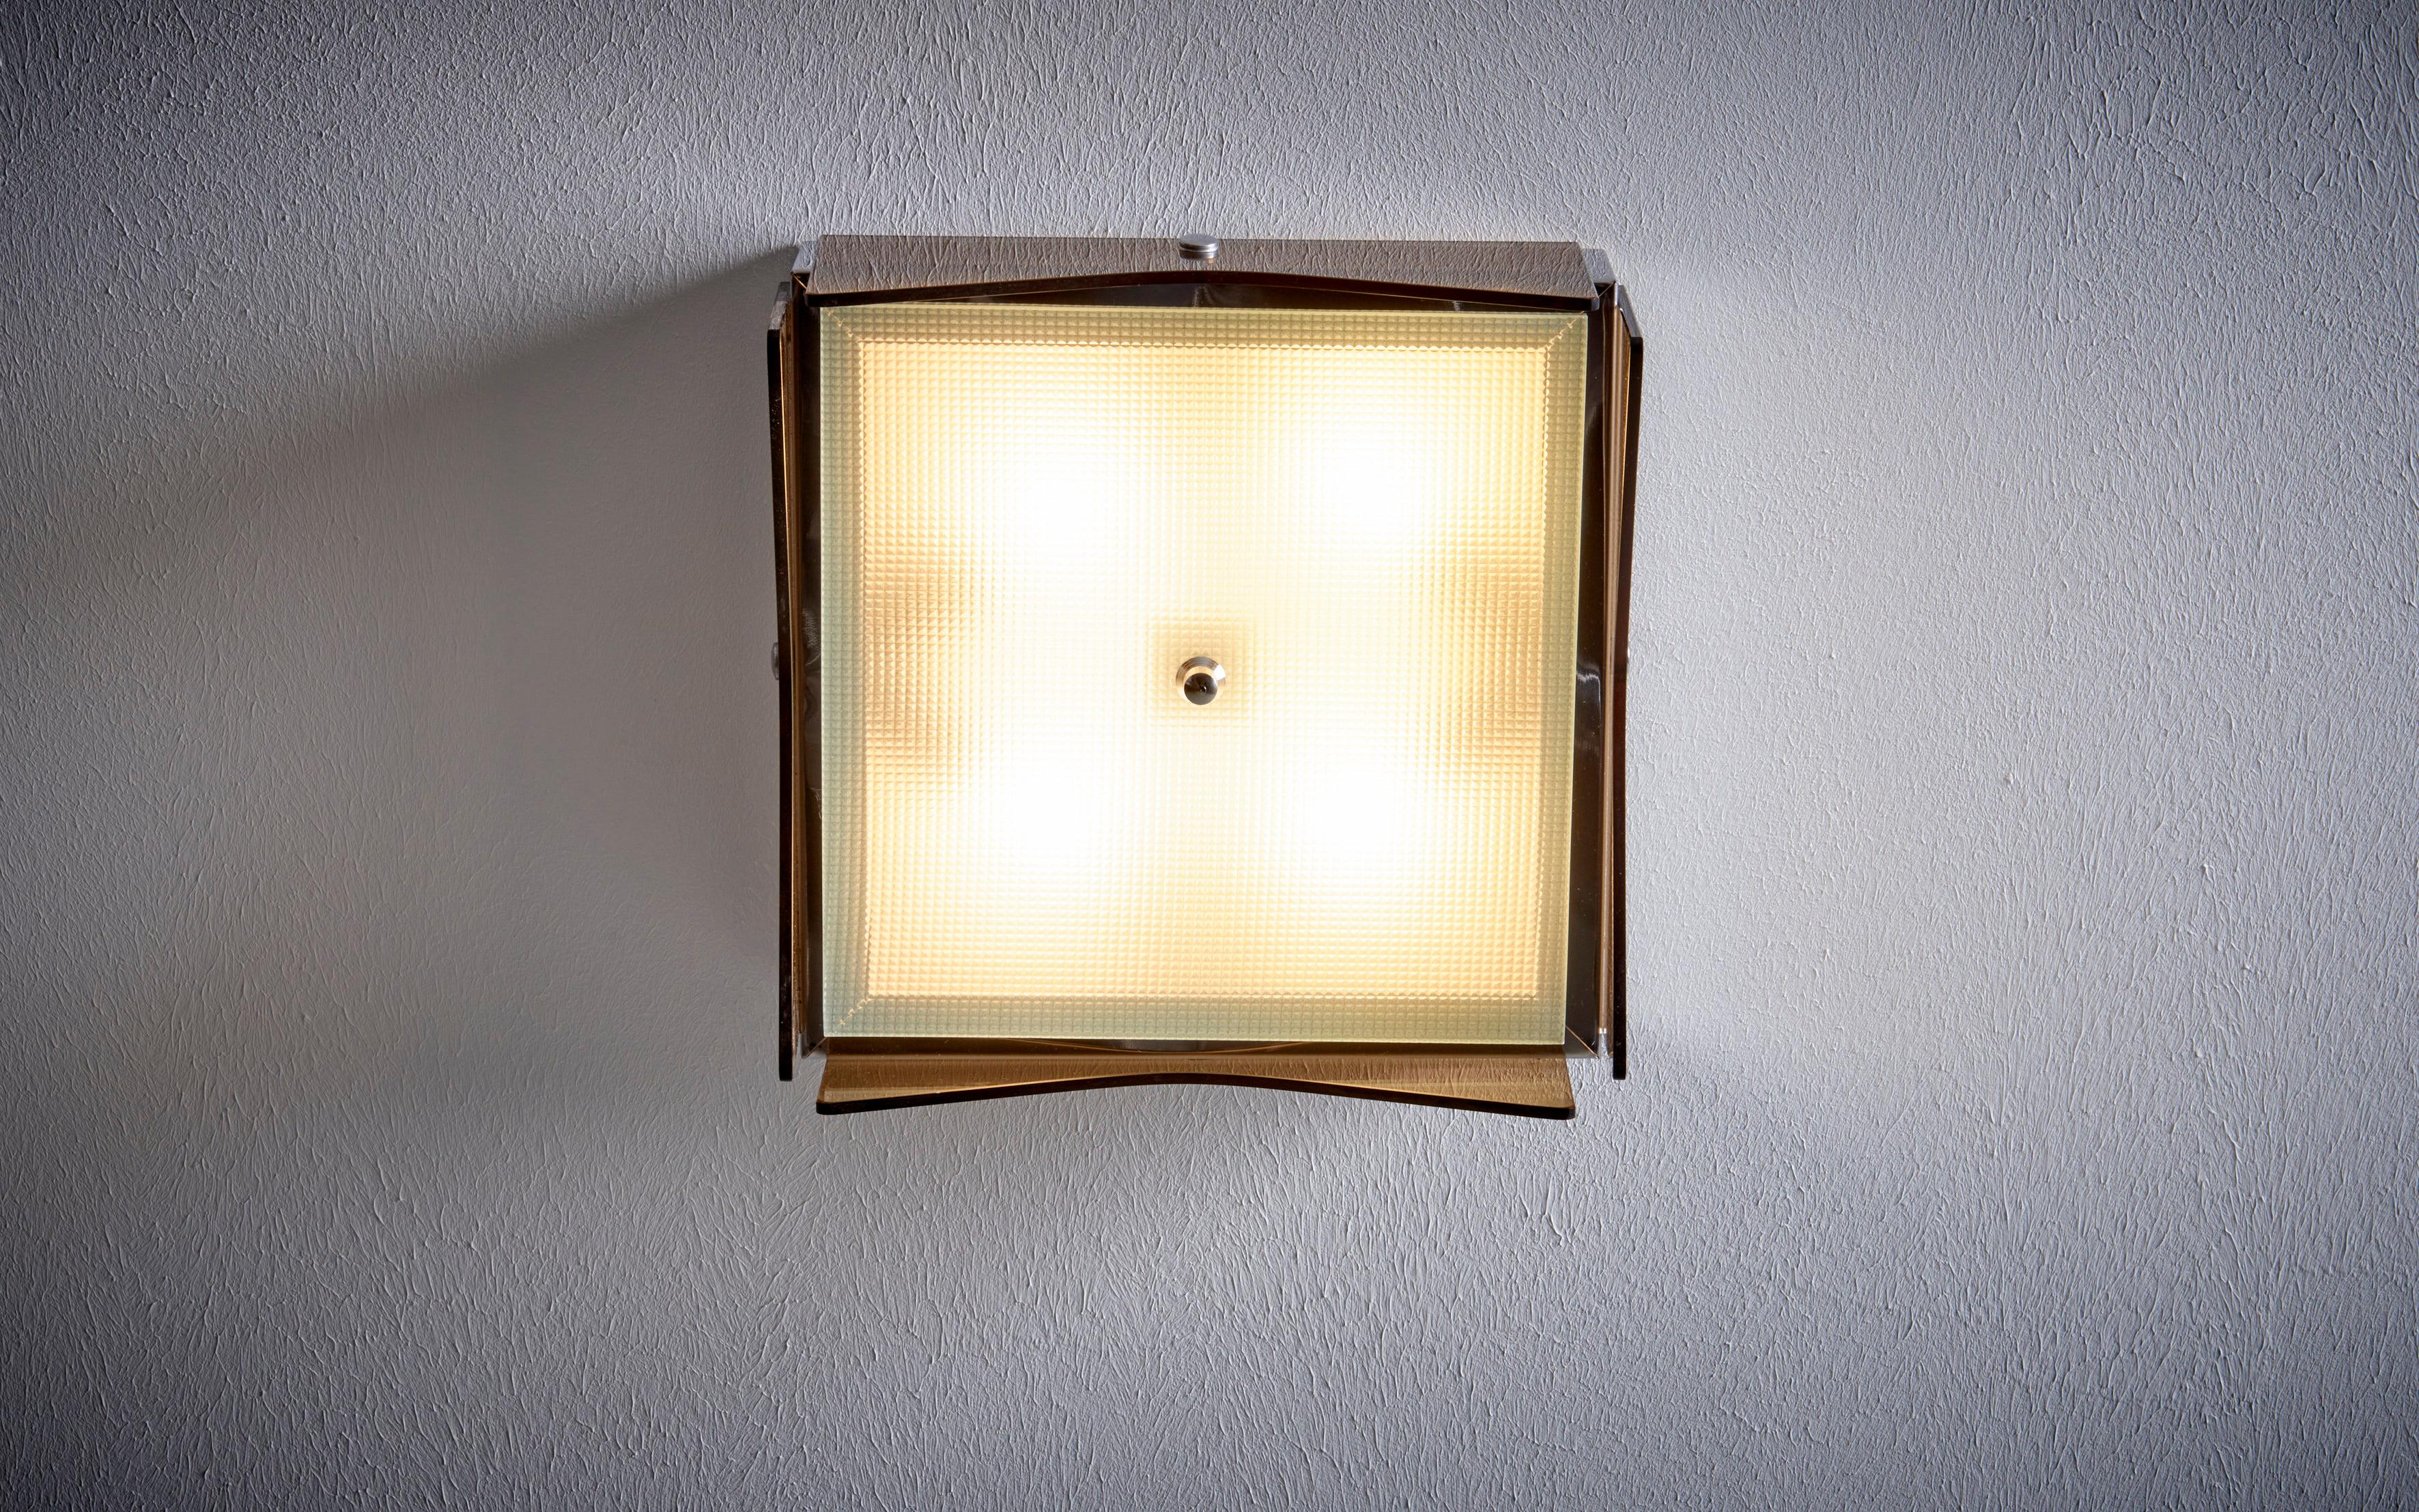 1960s Design Italian Wall Lamp nos in tinted brown glass. Price is per piece. We have two more listings with a flush mount of this type (one with a slightly different shape in tinted brown glass, one with clear glass).